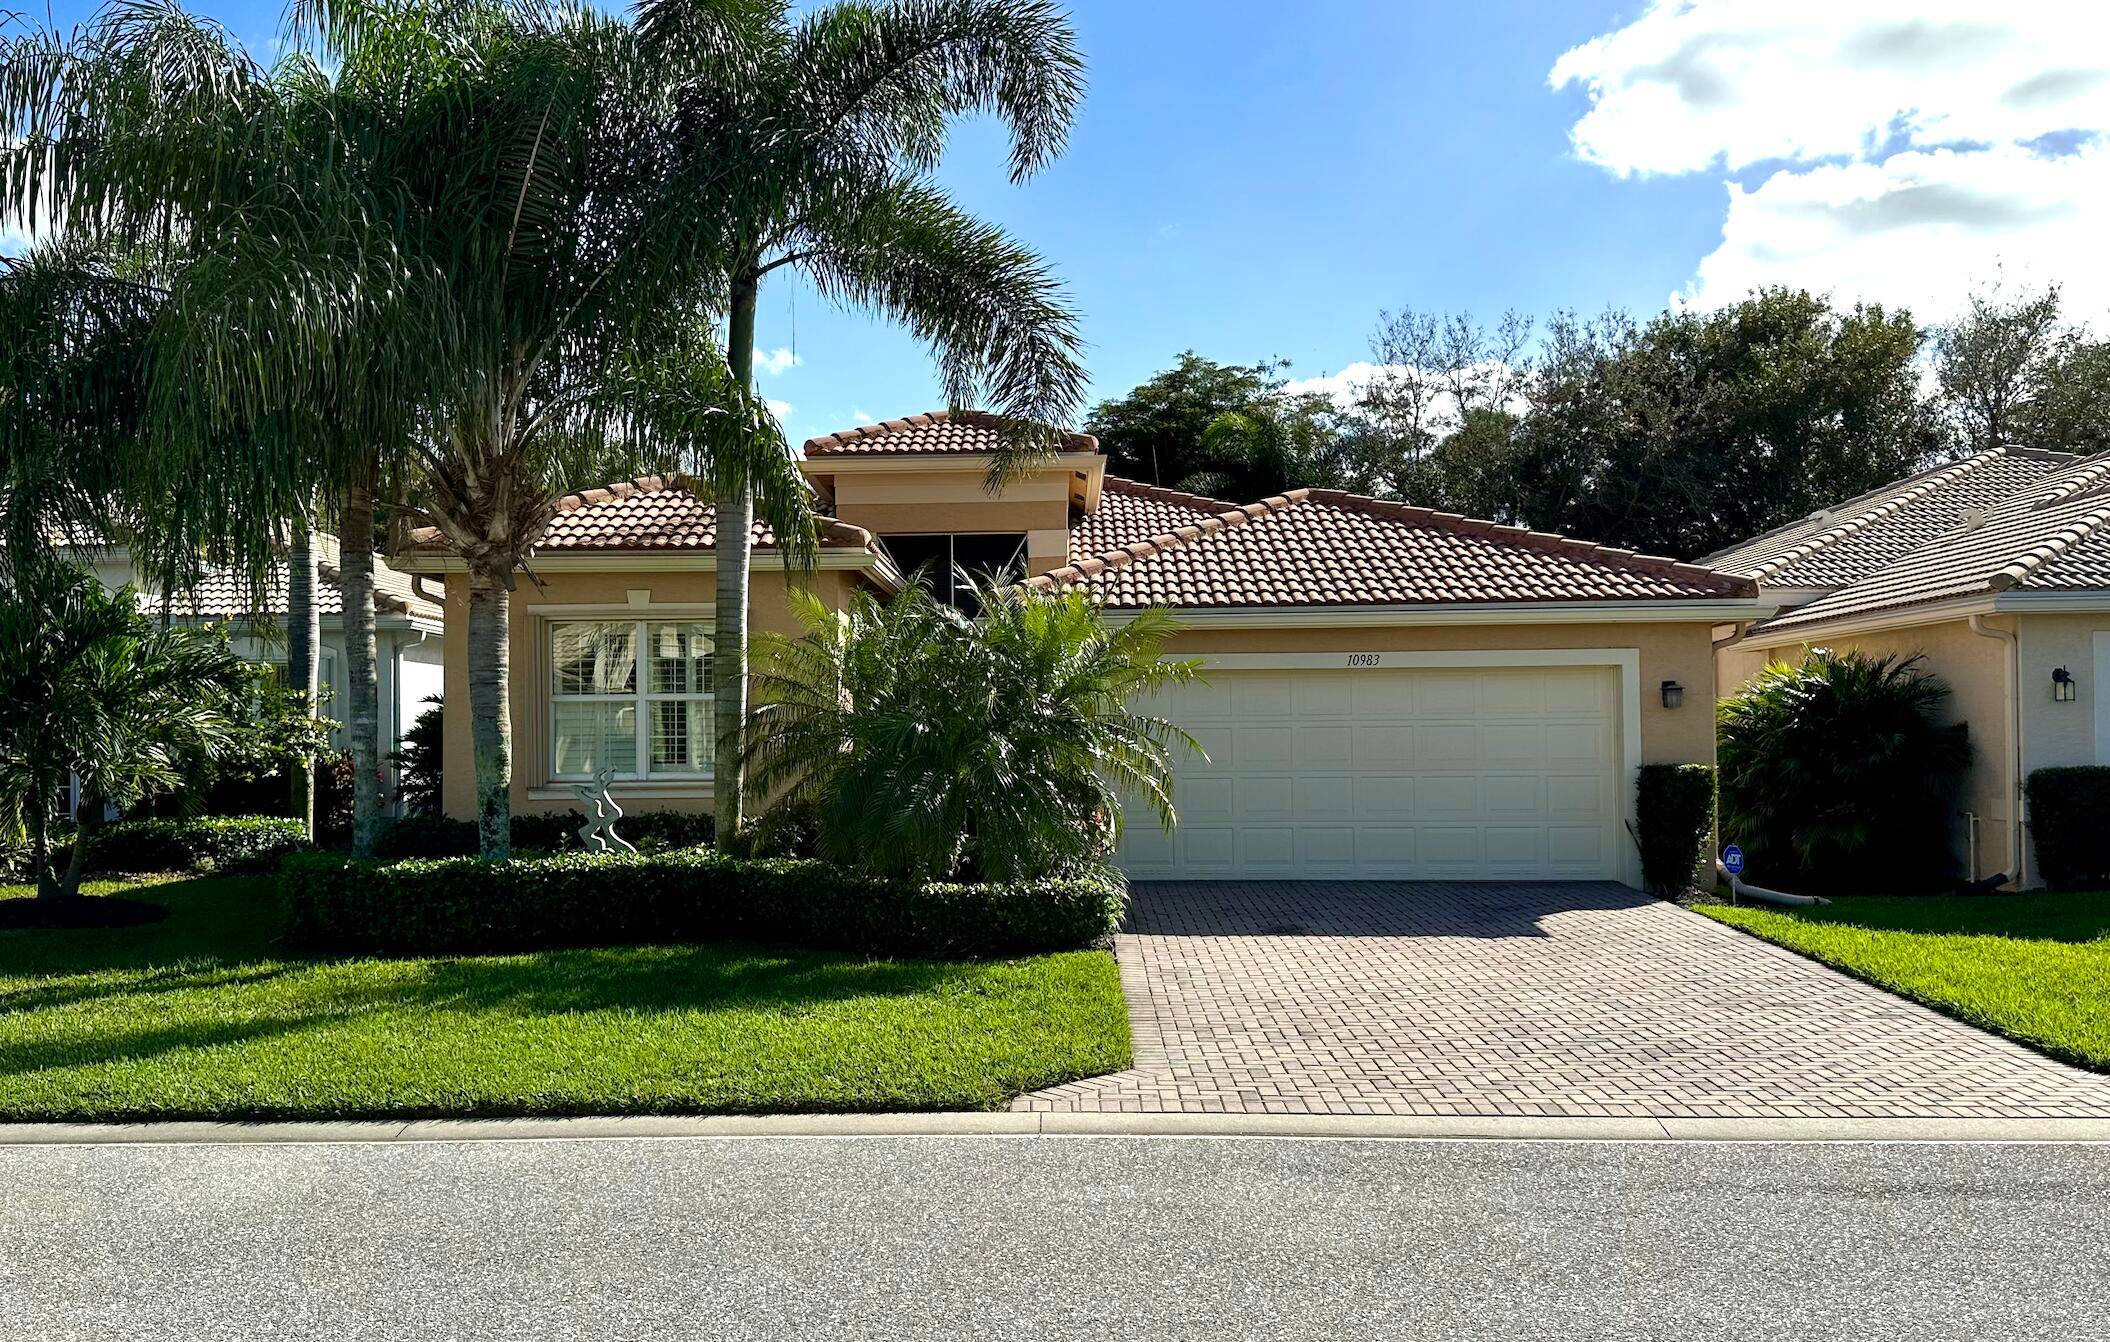 Come see this amazing 3 bedroom, 2 bathroom single family home offering comfort and convenience located in the highly desirable community of Valencia Reserve.